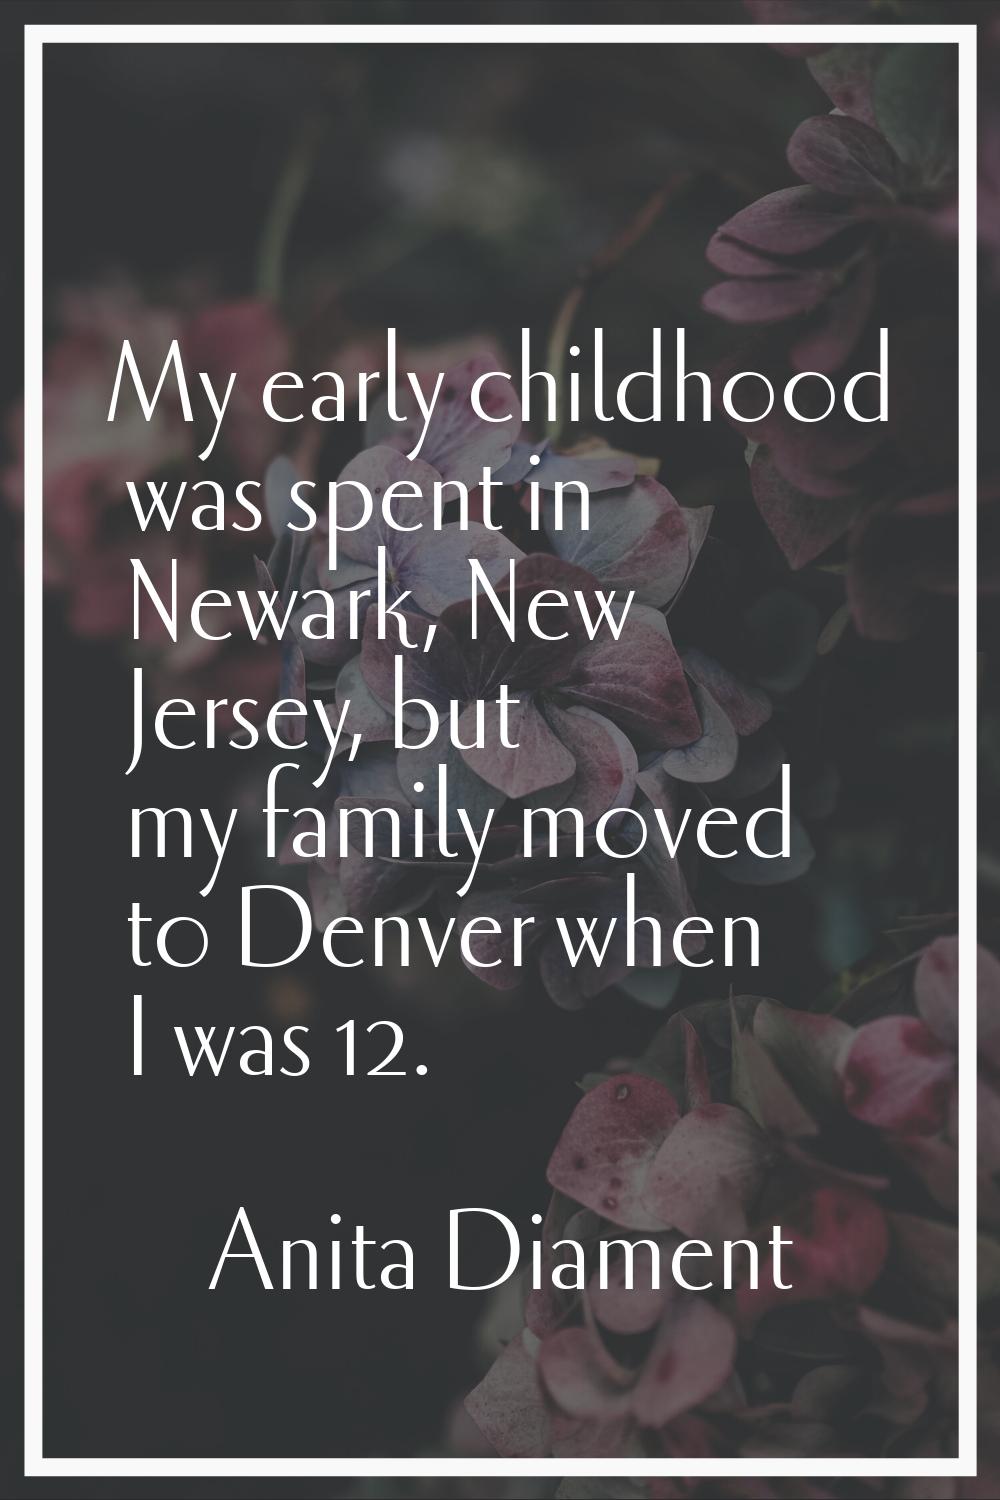 My early childhood was spent in Newark, New Jersey, but my family moved to Denver when I was 12.